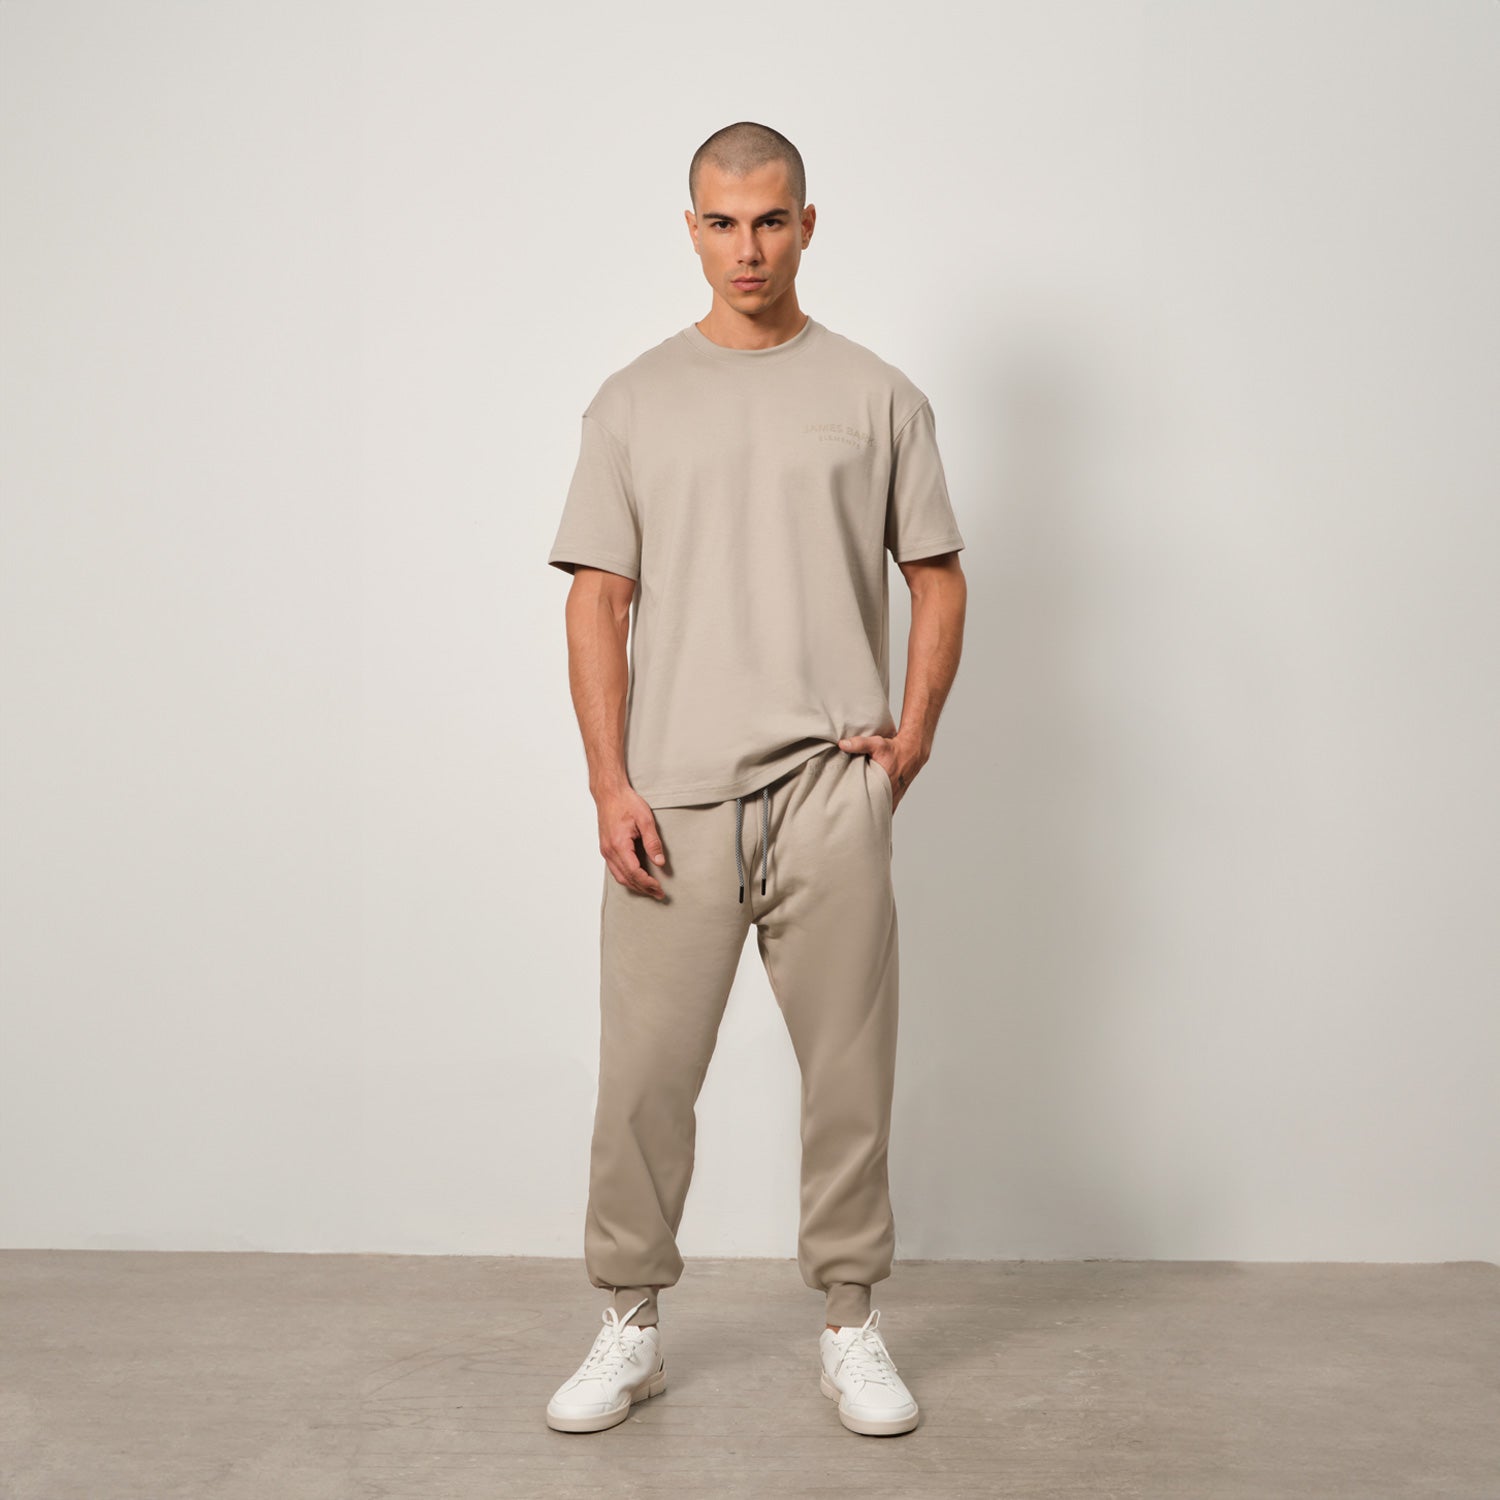 Men's Relaxed Fit Jersey Tee - JAMES BARK